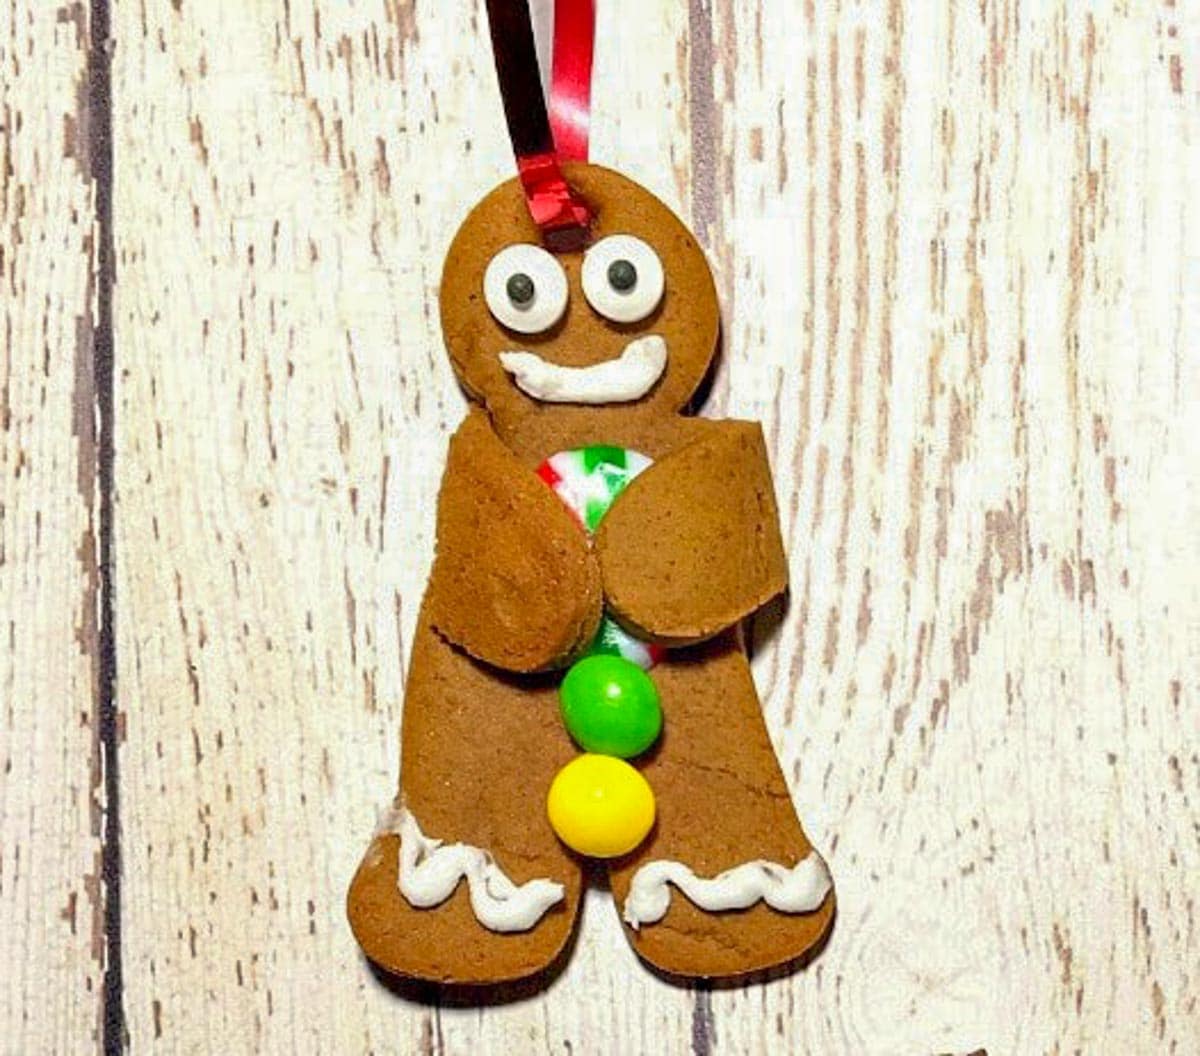 gingerbread man cookie (with string at top for decoration) on white faux wood surface